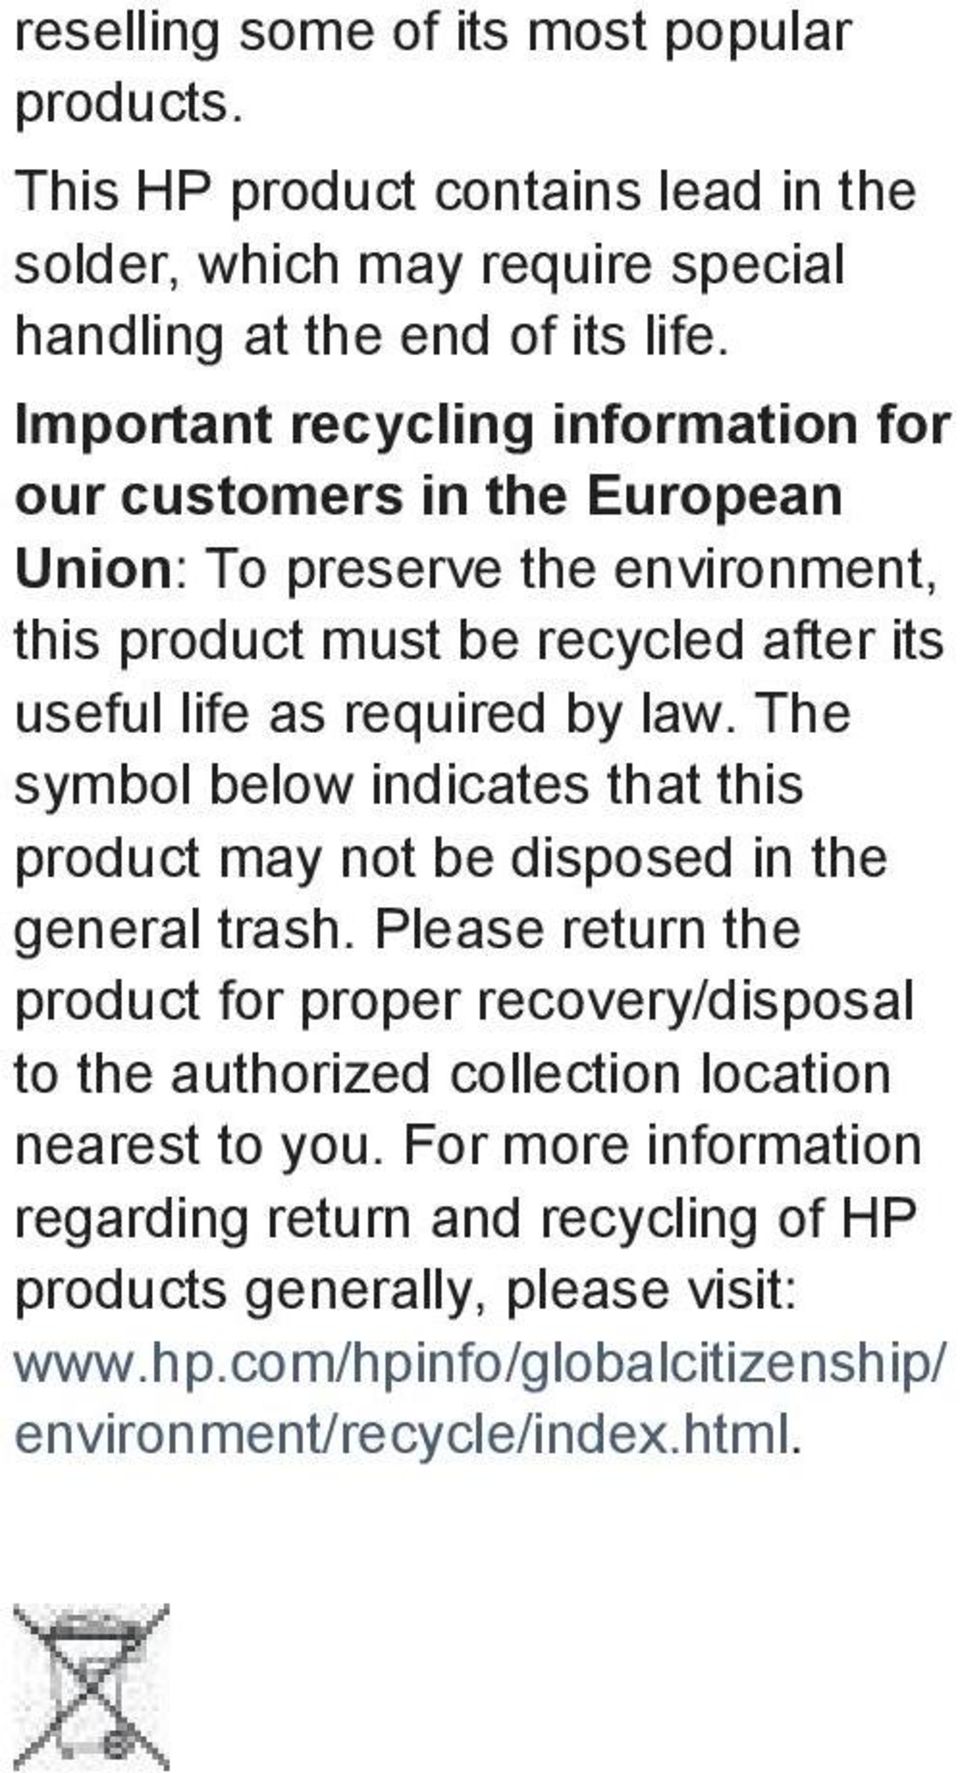 law. The symbol below indicates that this product may not be disposed in the general trash.